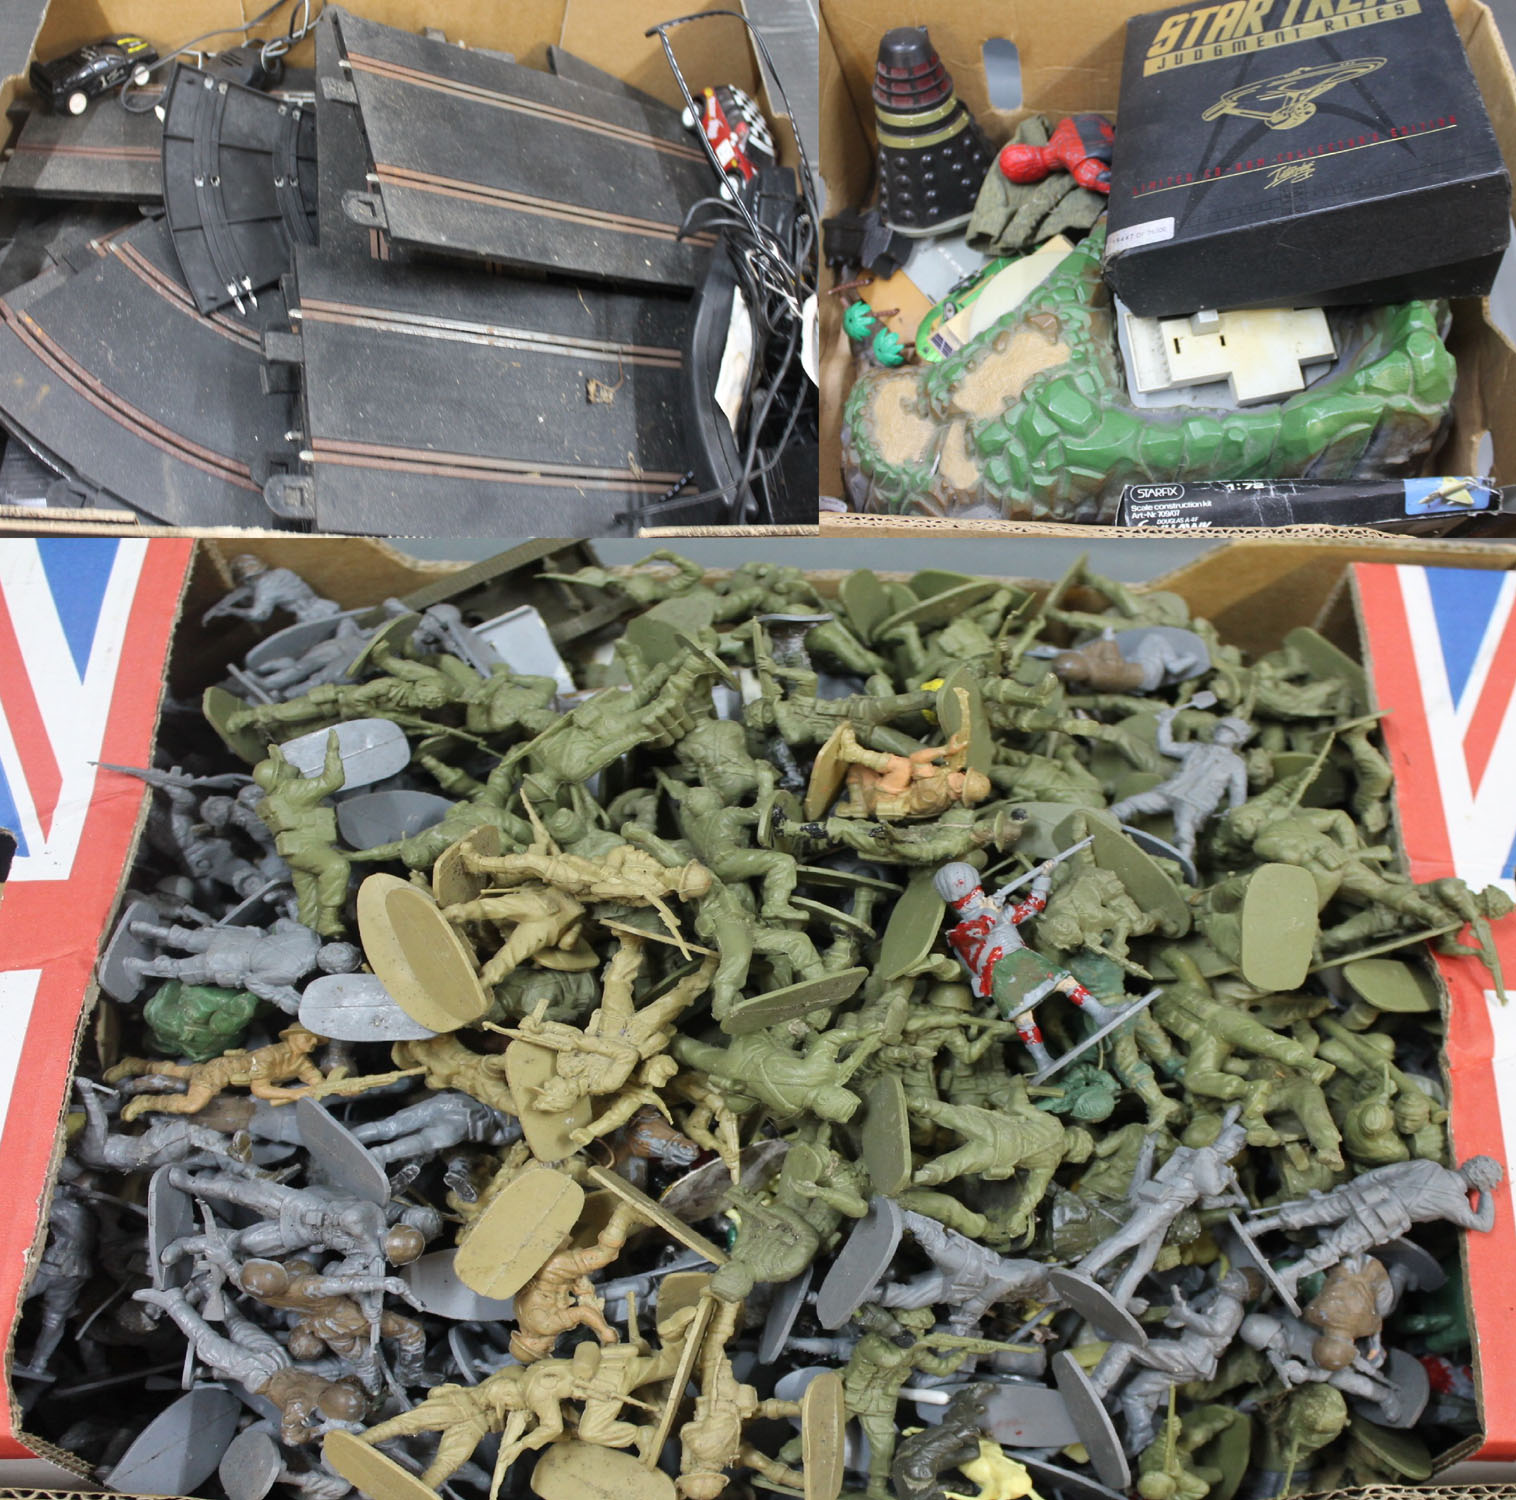 3 boxes of various toys including Scalextric, toy soldiers (including Britain's Deetail),